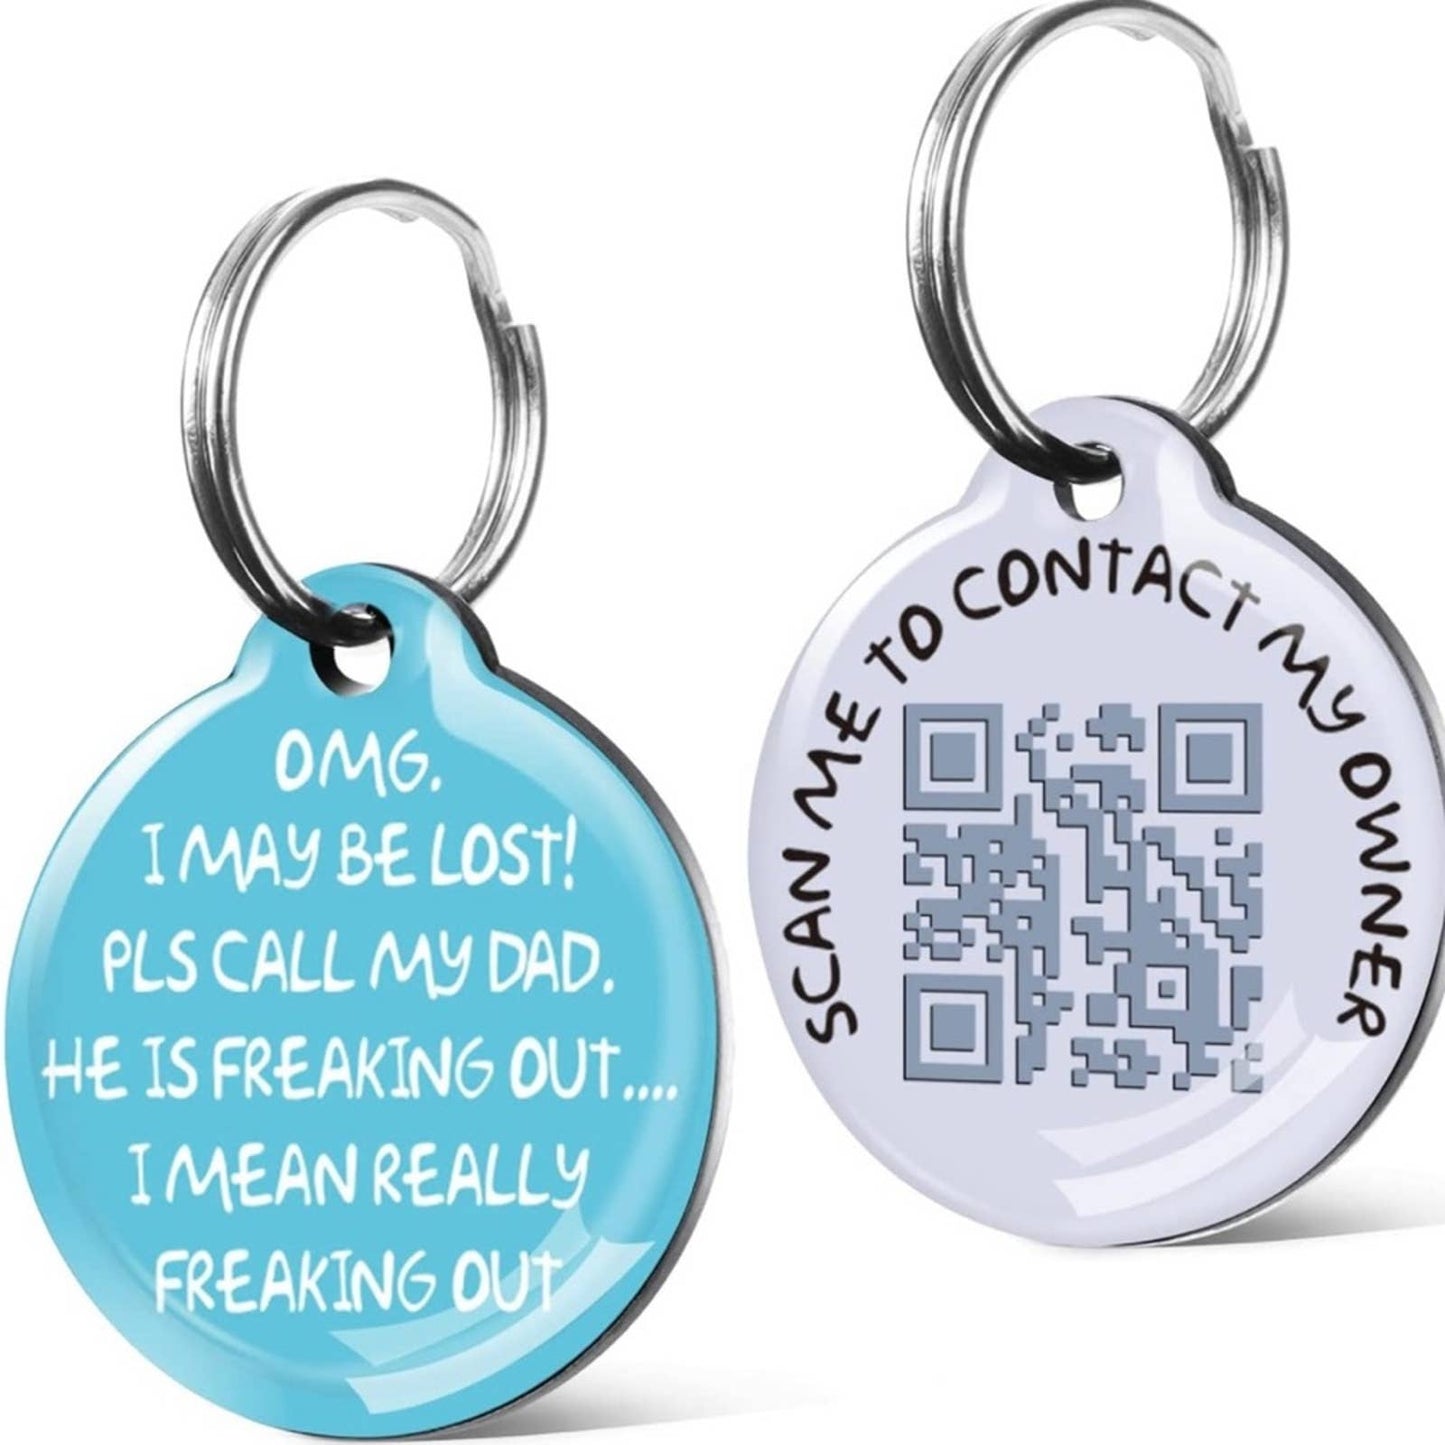 WOTTISH Dog Tag - Dog Tags Personalized for Pets (Sky Blue)